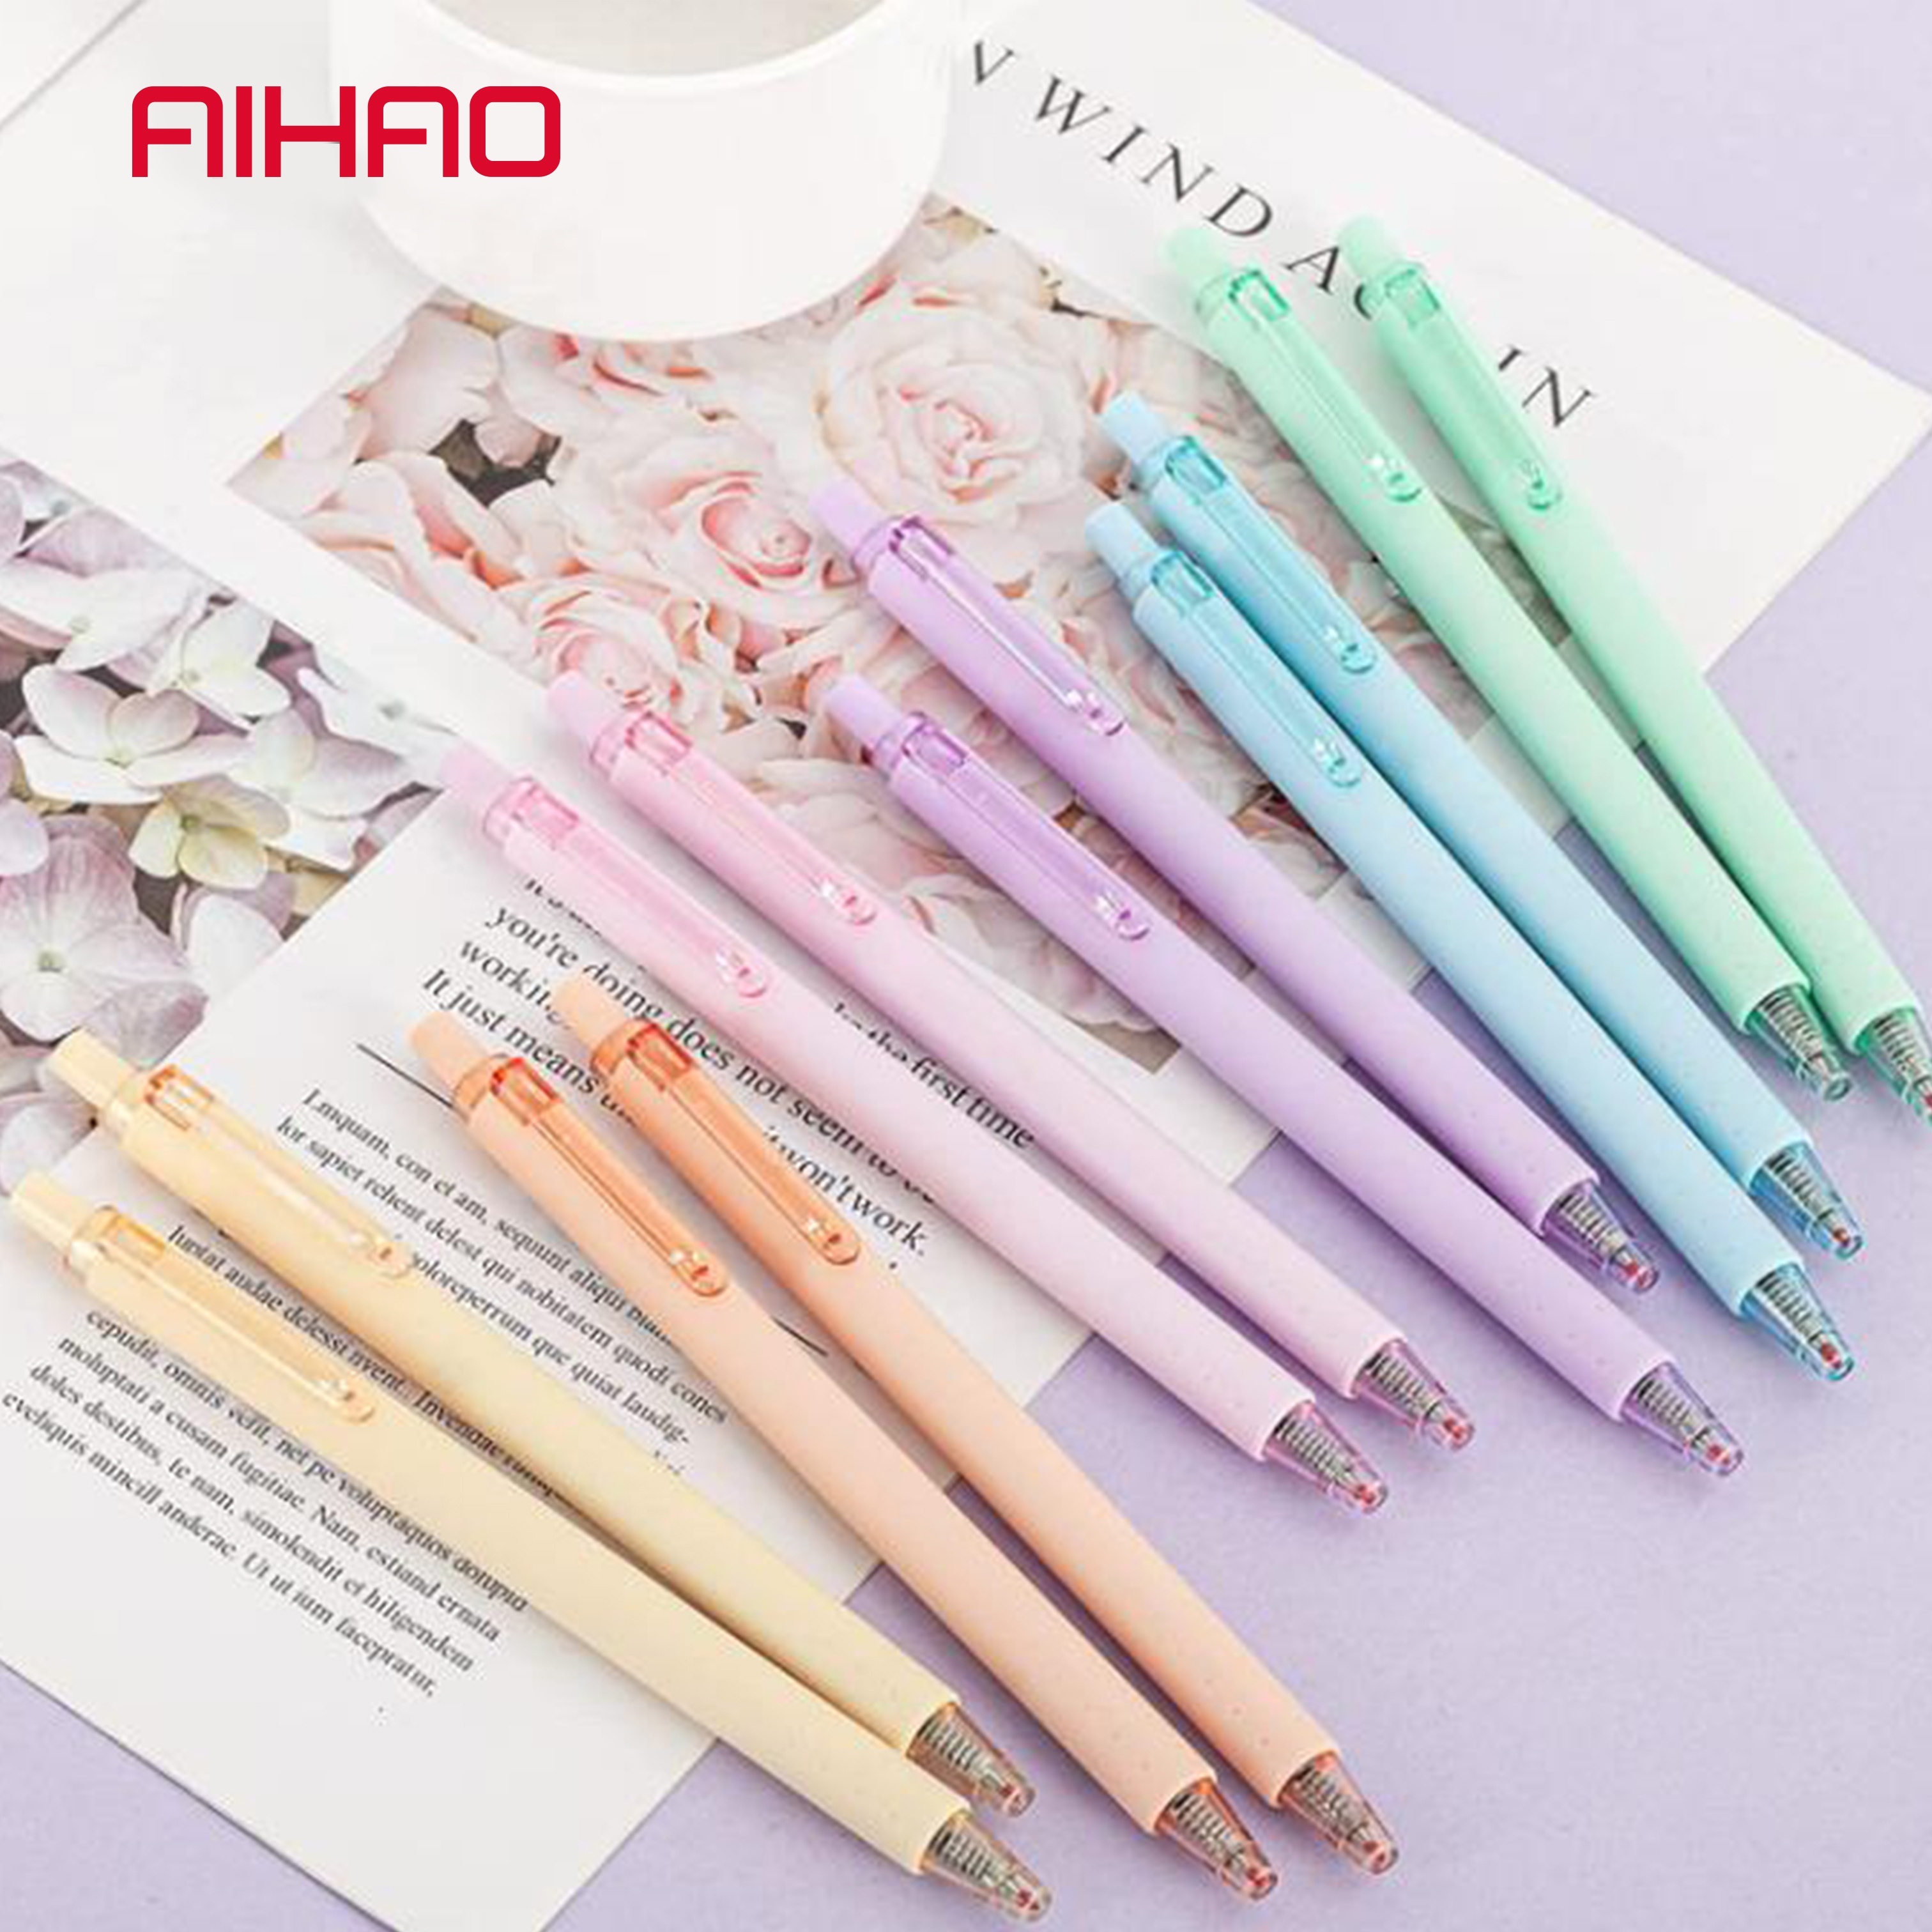 

12pcs Aihao Retractable Cute Gel Pens, Black Ink, Fine Point, Smooth Writing With Soft Pastel Color Grip, Pens For Planner, Taking Notes, 0.5mm